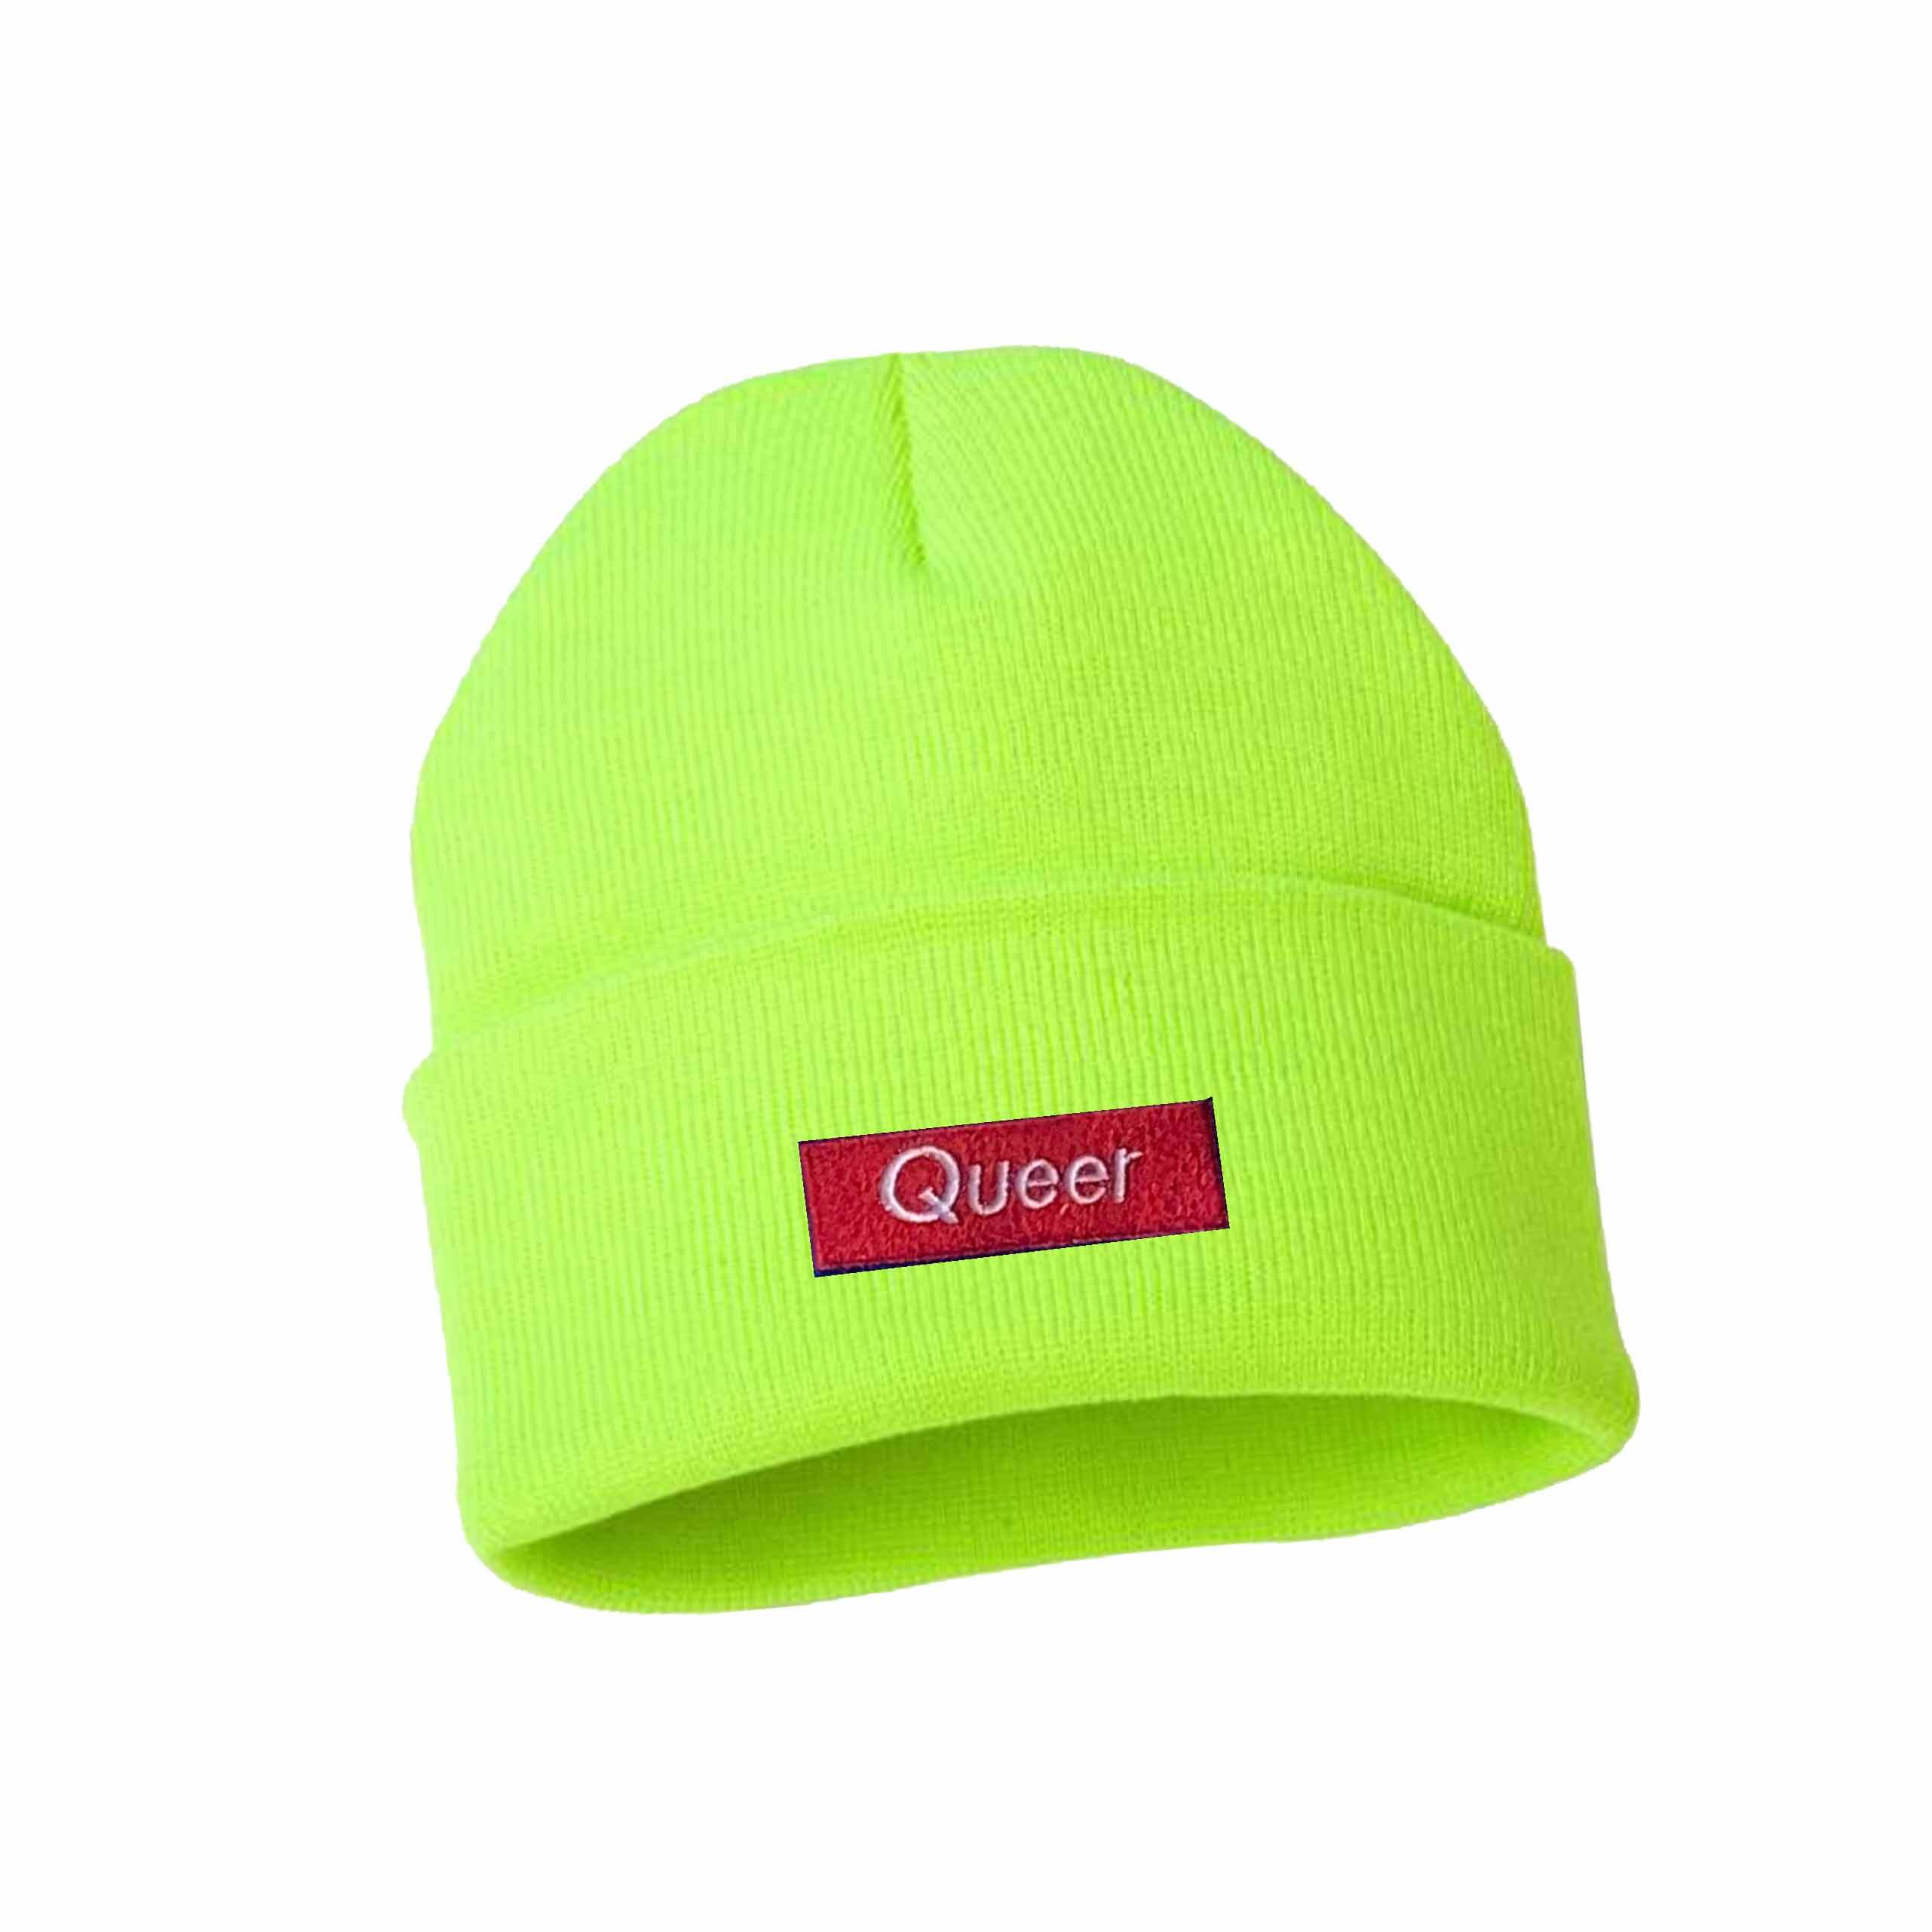 Queer Knit Cuff Beanie safety yellow